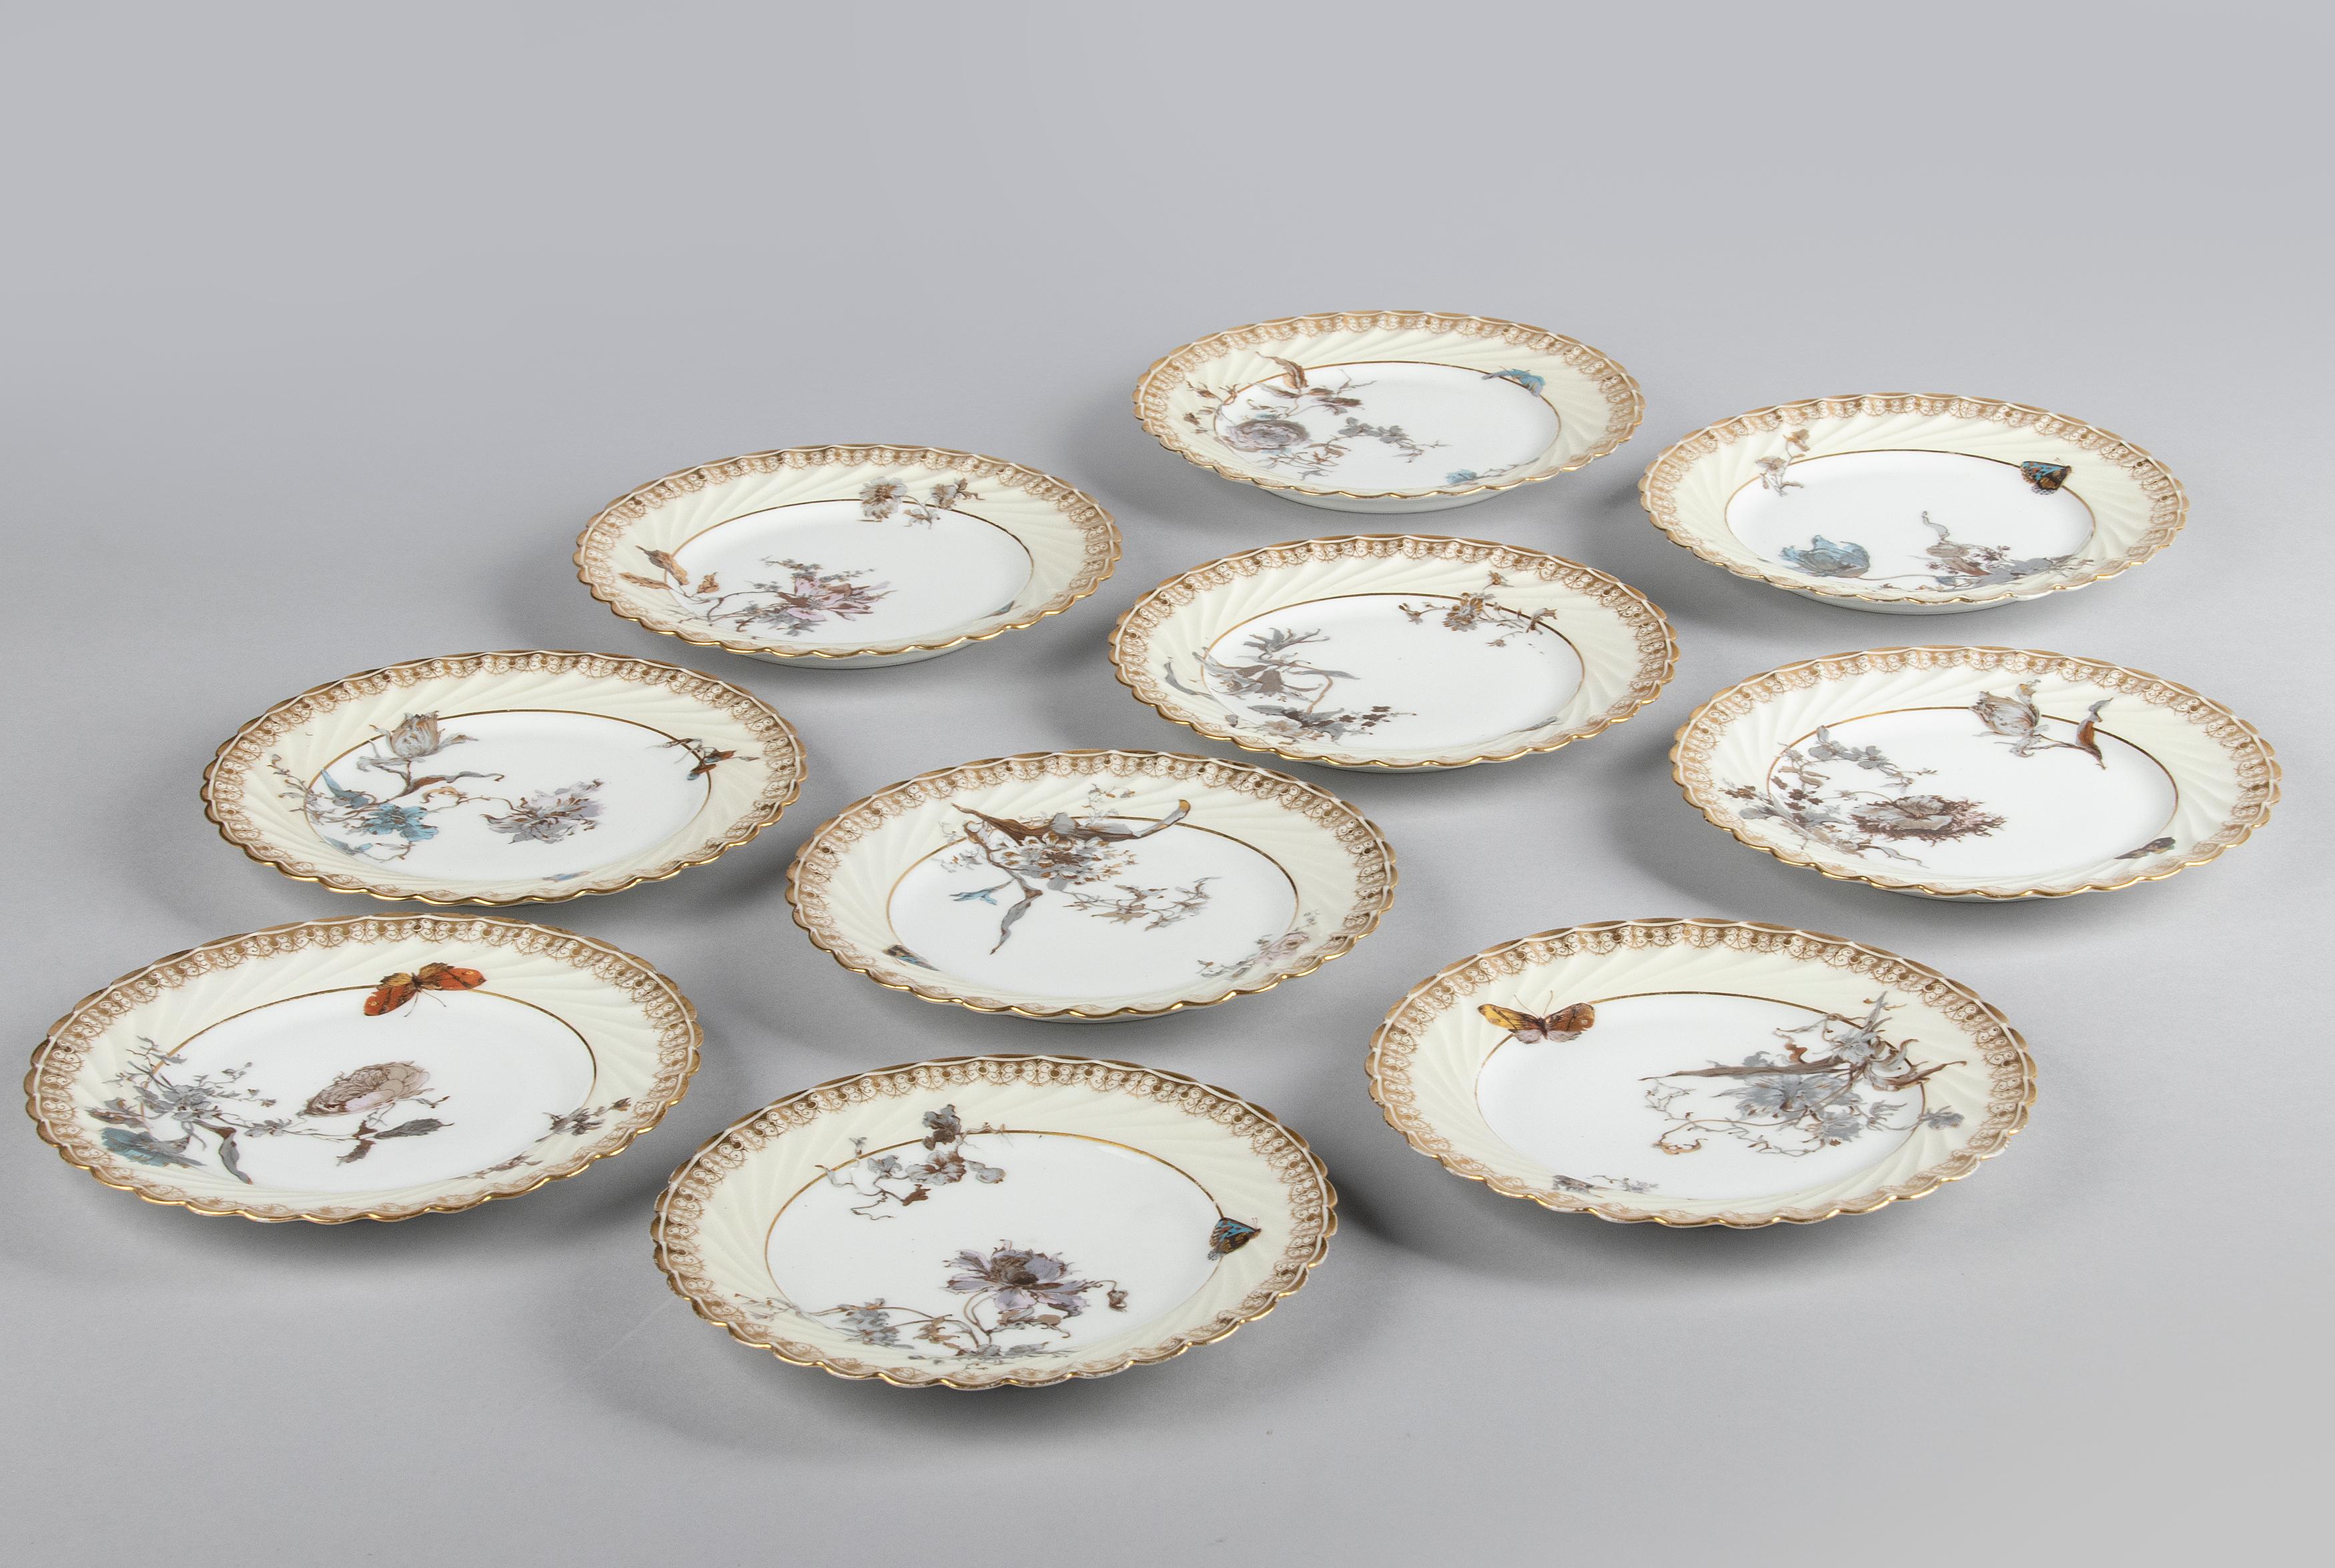 Beautiful set of 10 porcelain cake plates from the French brand Haviland Limoges. The plates have curved edges and are richly decorated with various images of flowers, butterflies and gold-coloured accents. The porcelain dates from around